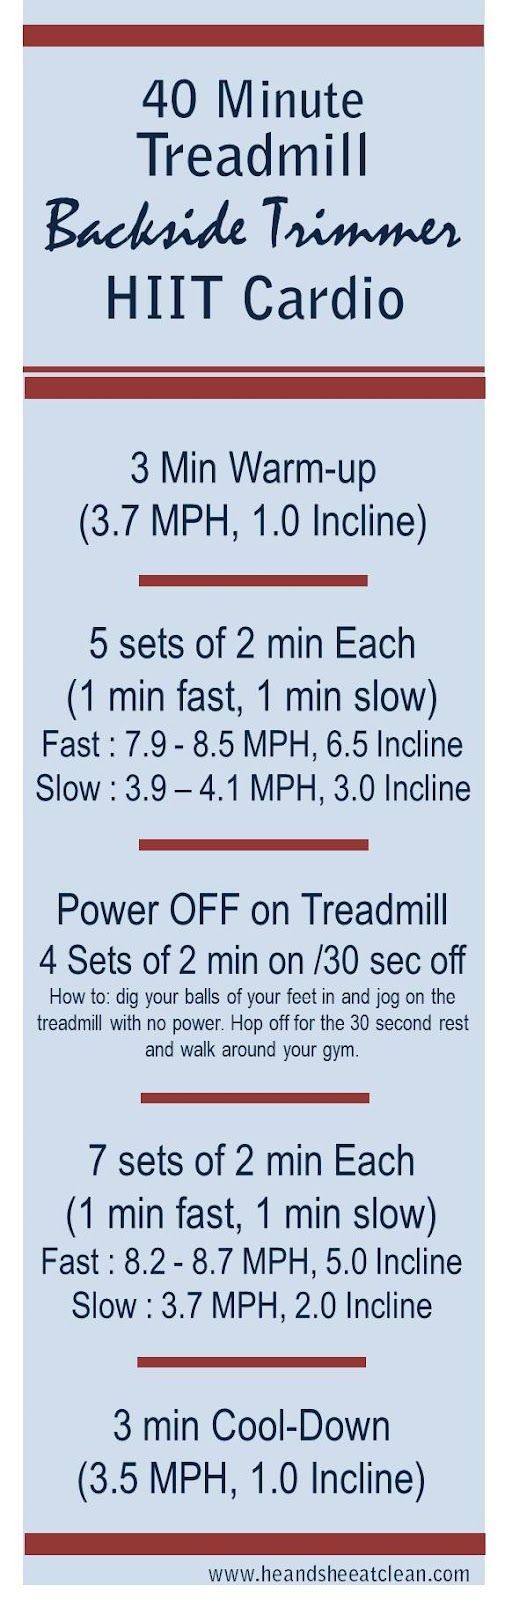 Looking to tone up your backside? It's all right here! Go hop on the treadmi